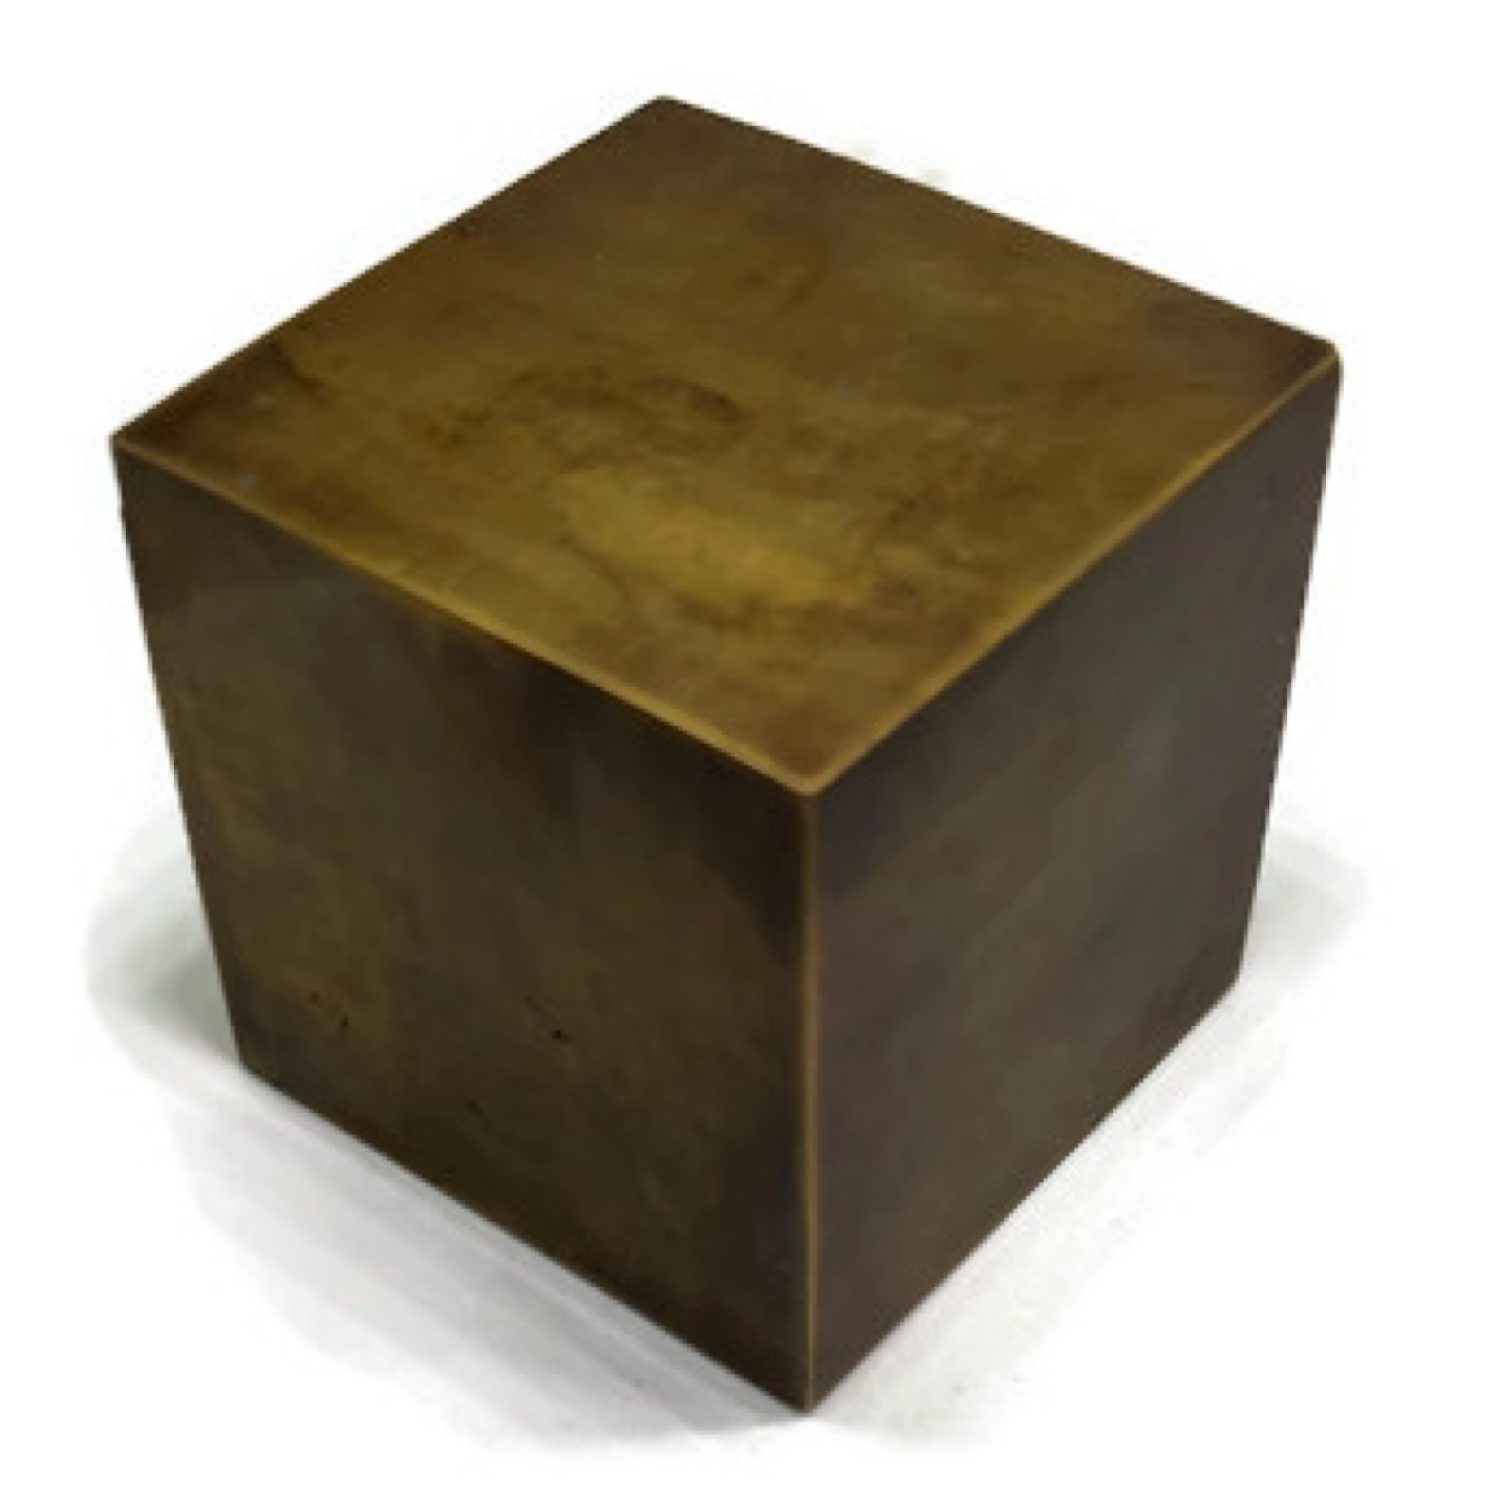 Large Hollow Brass Cube Bullions Boxes 7.2 Cm X 7.2 Cm Heavy Solid Brass Hollow Cast Hand Made Polished 2.78 Inch 2 1500x1500 